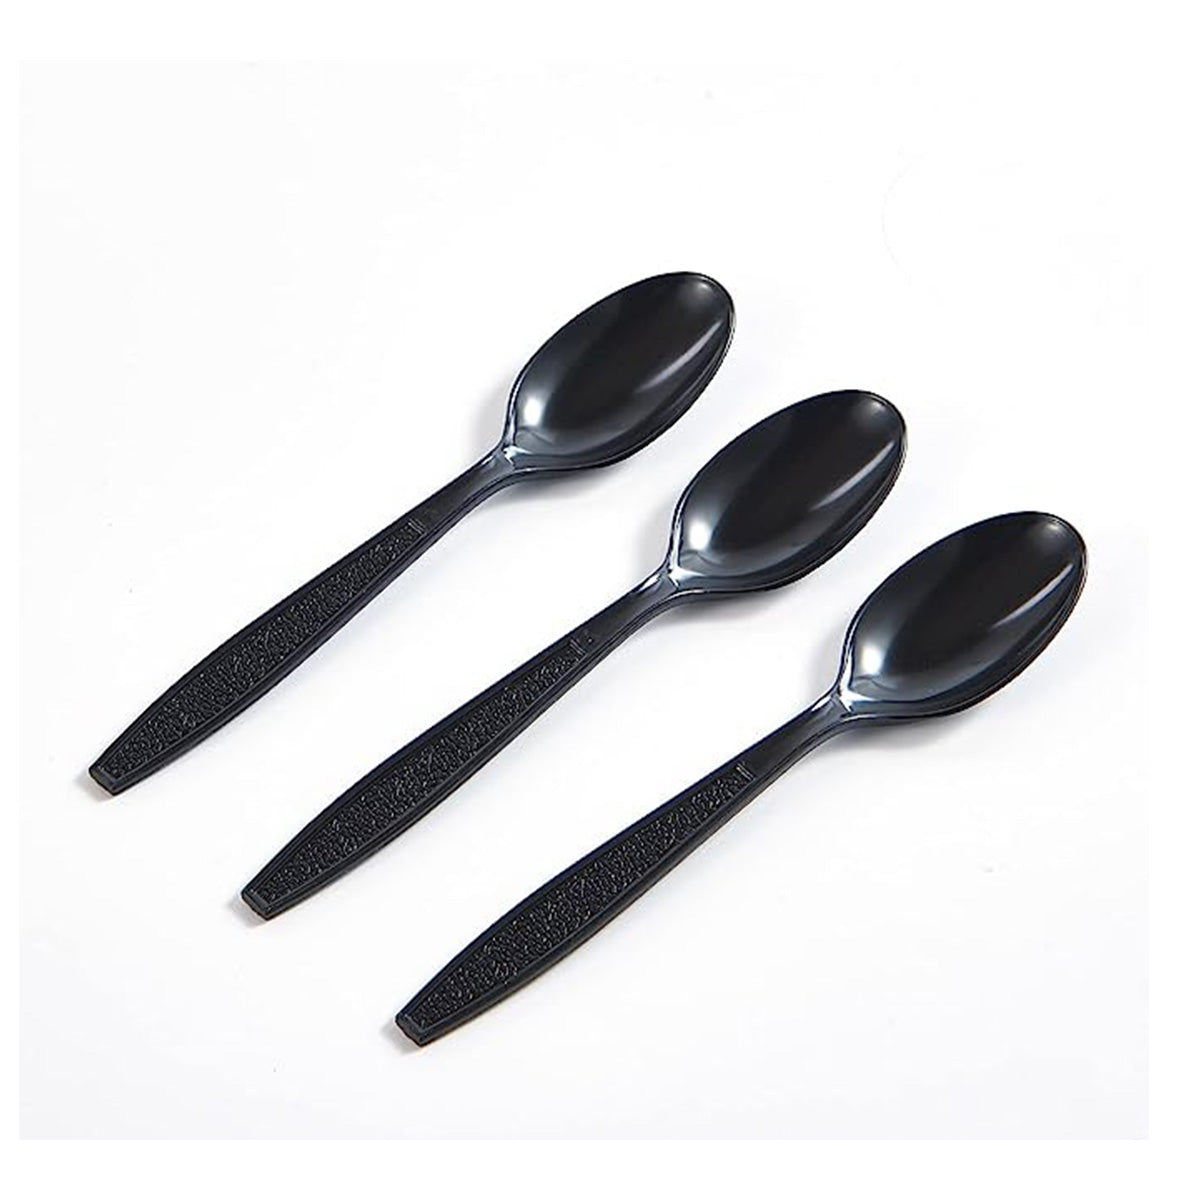 CIAO! Polystyrene Disposable Teaspoons Black (Case of 1,000)